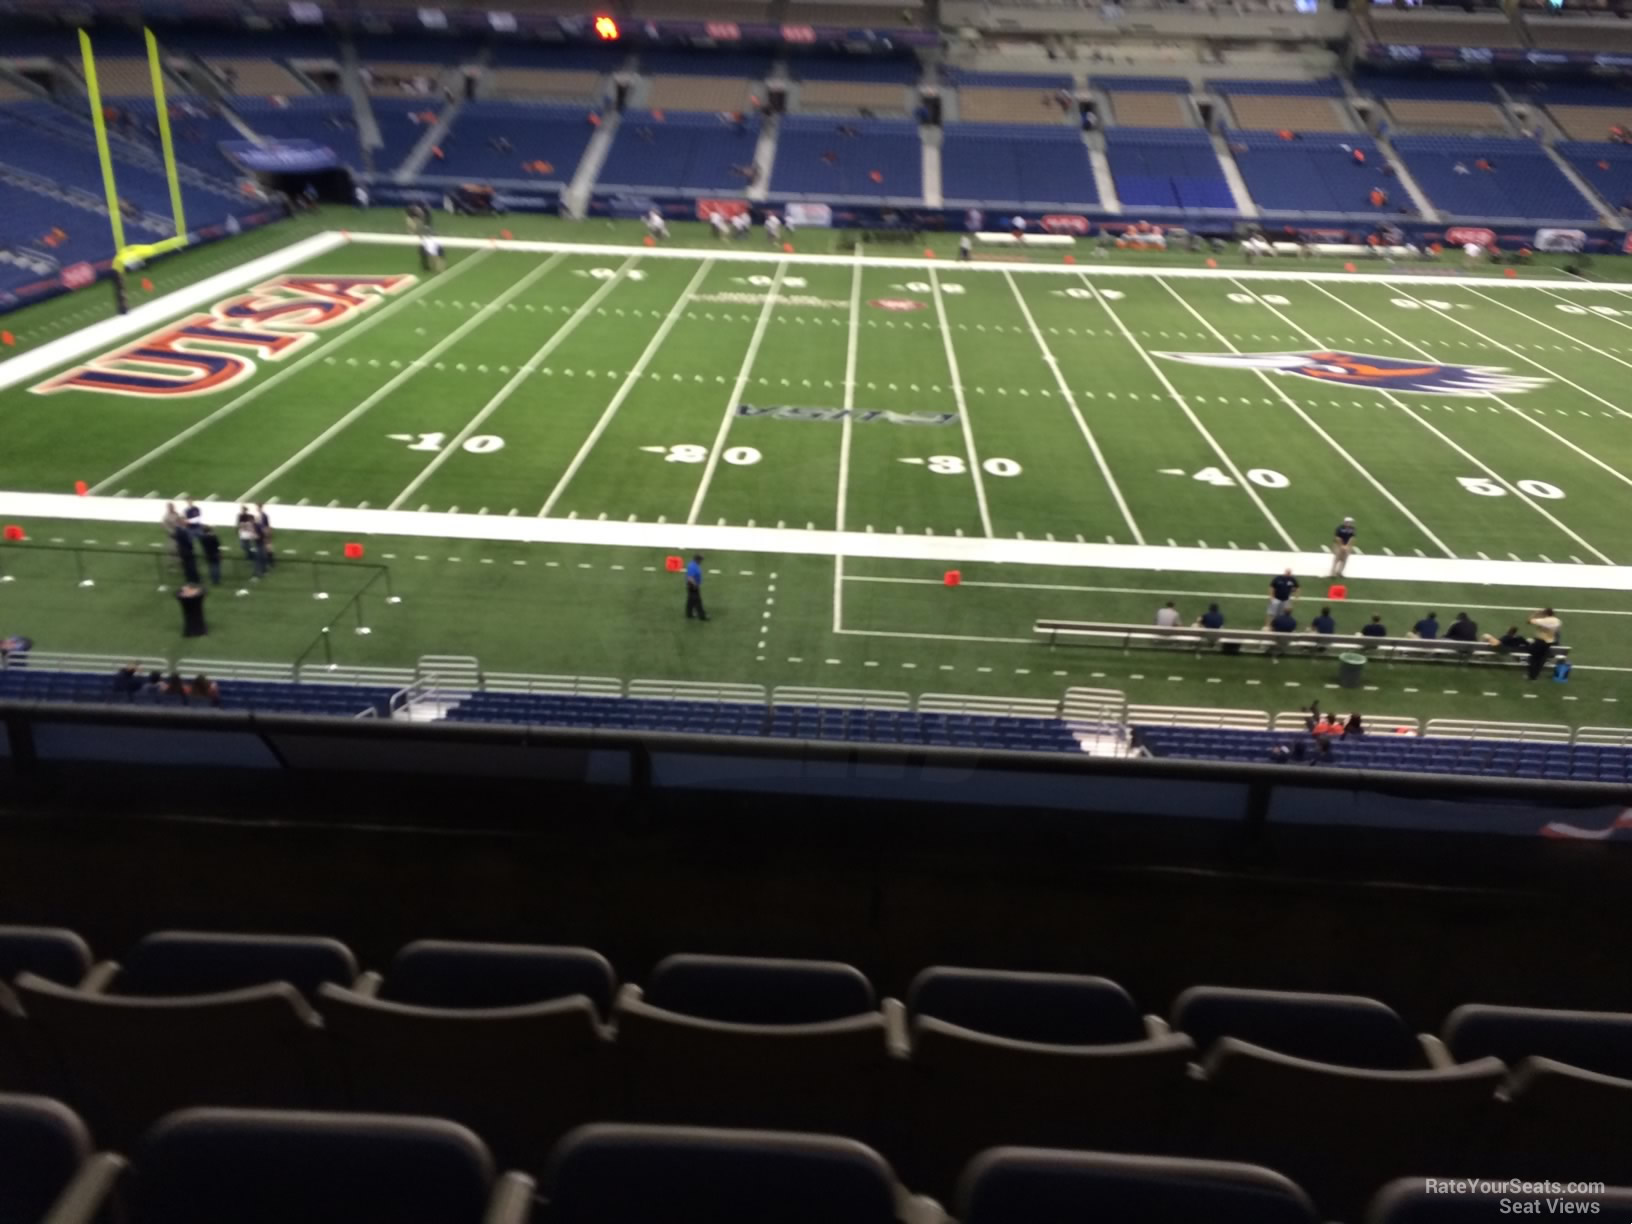 section 236, row 5 seat view  for football - alamodome